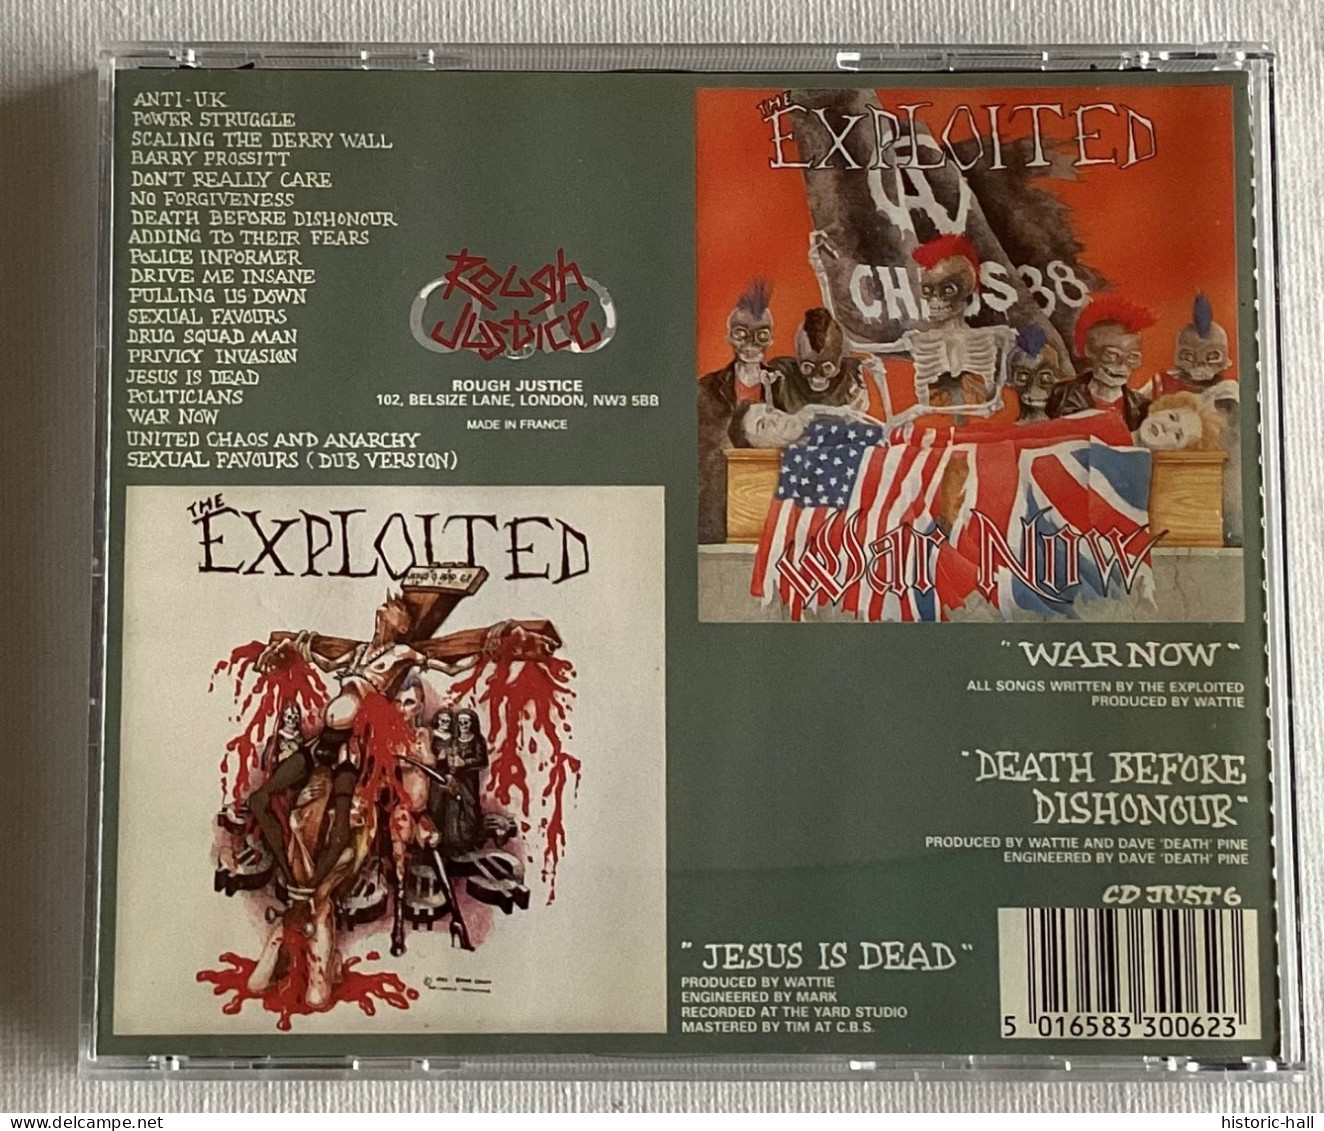 EXPLOITED - Death Before Dishonour / War Now / Jesus Is Dead - CD - 1987/90 - French Press - Punk